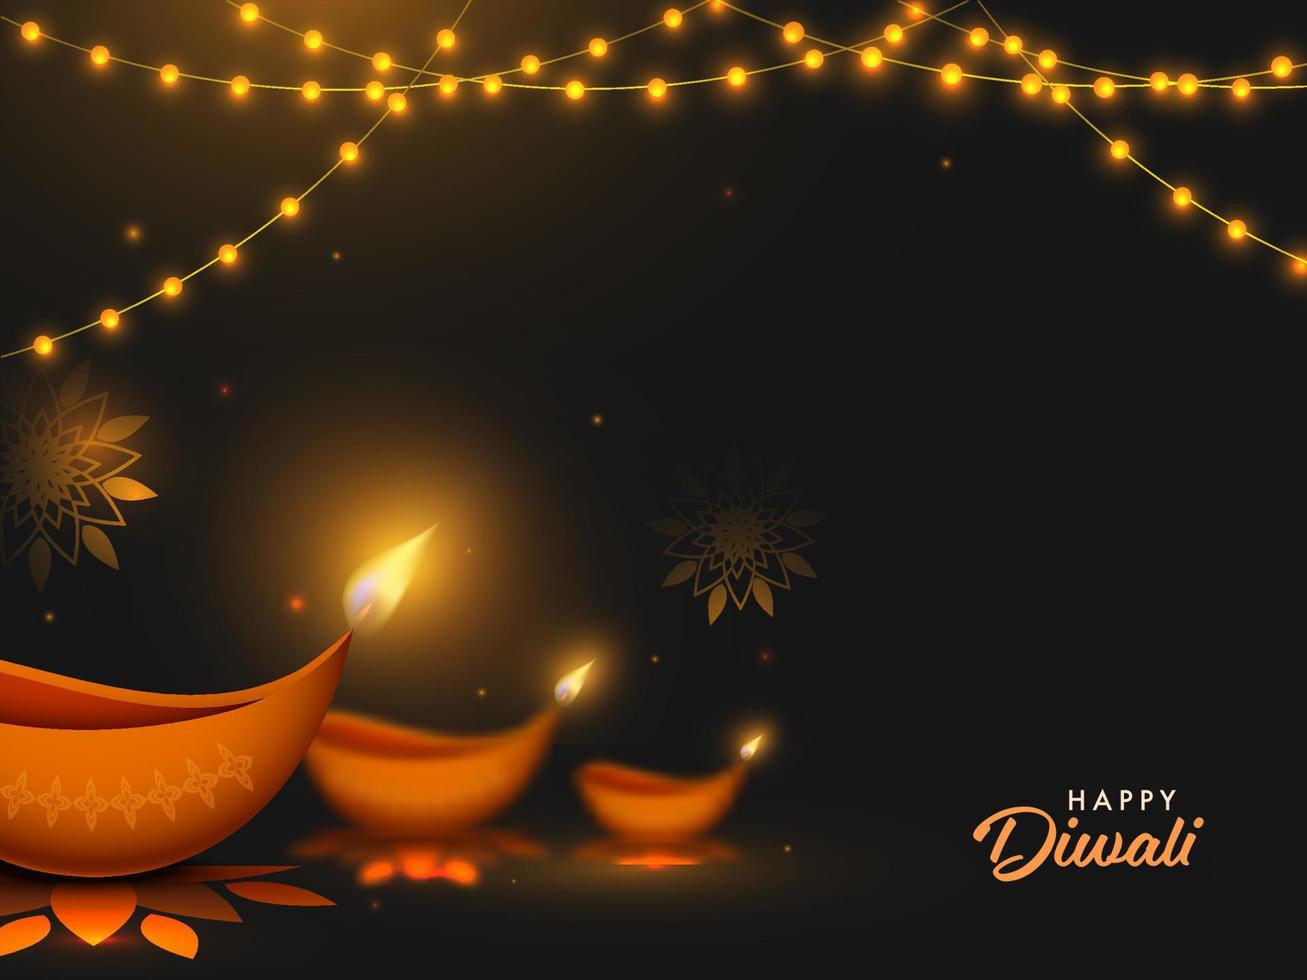 Happy Diwali Text With Illuminated Oil Lamps And Lighting Garland Decorated On Black Background. vector